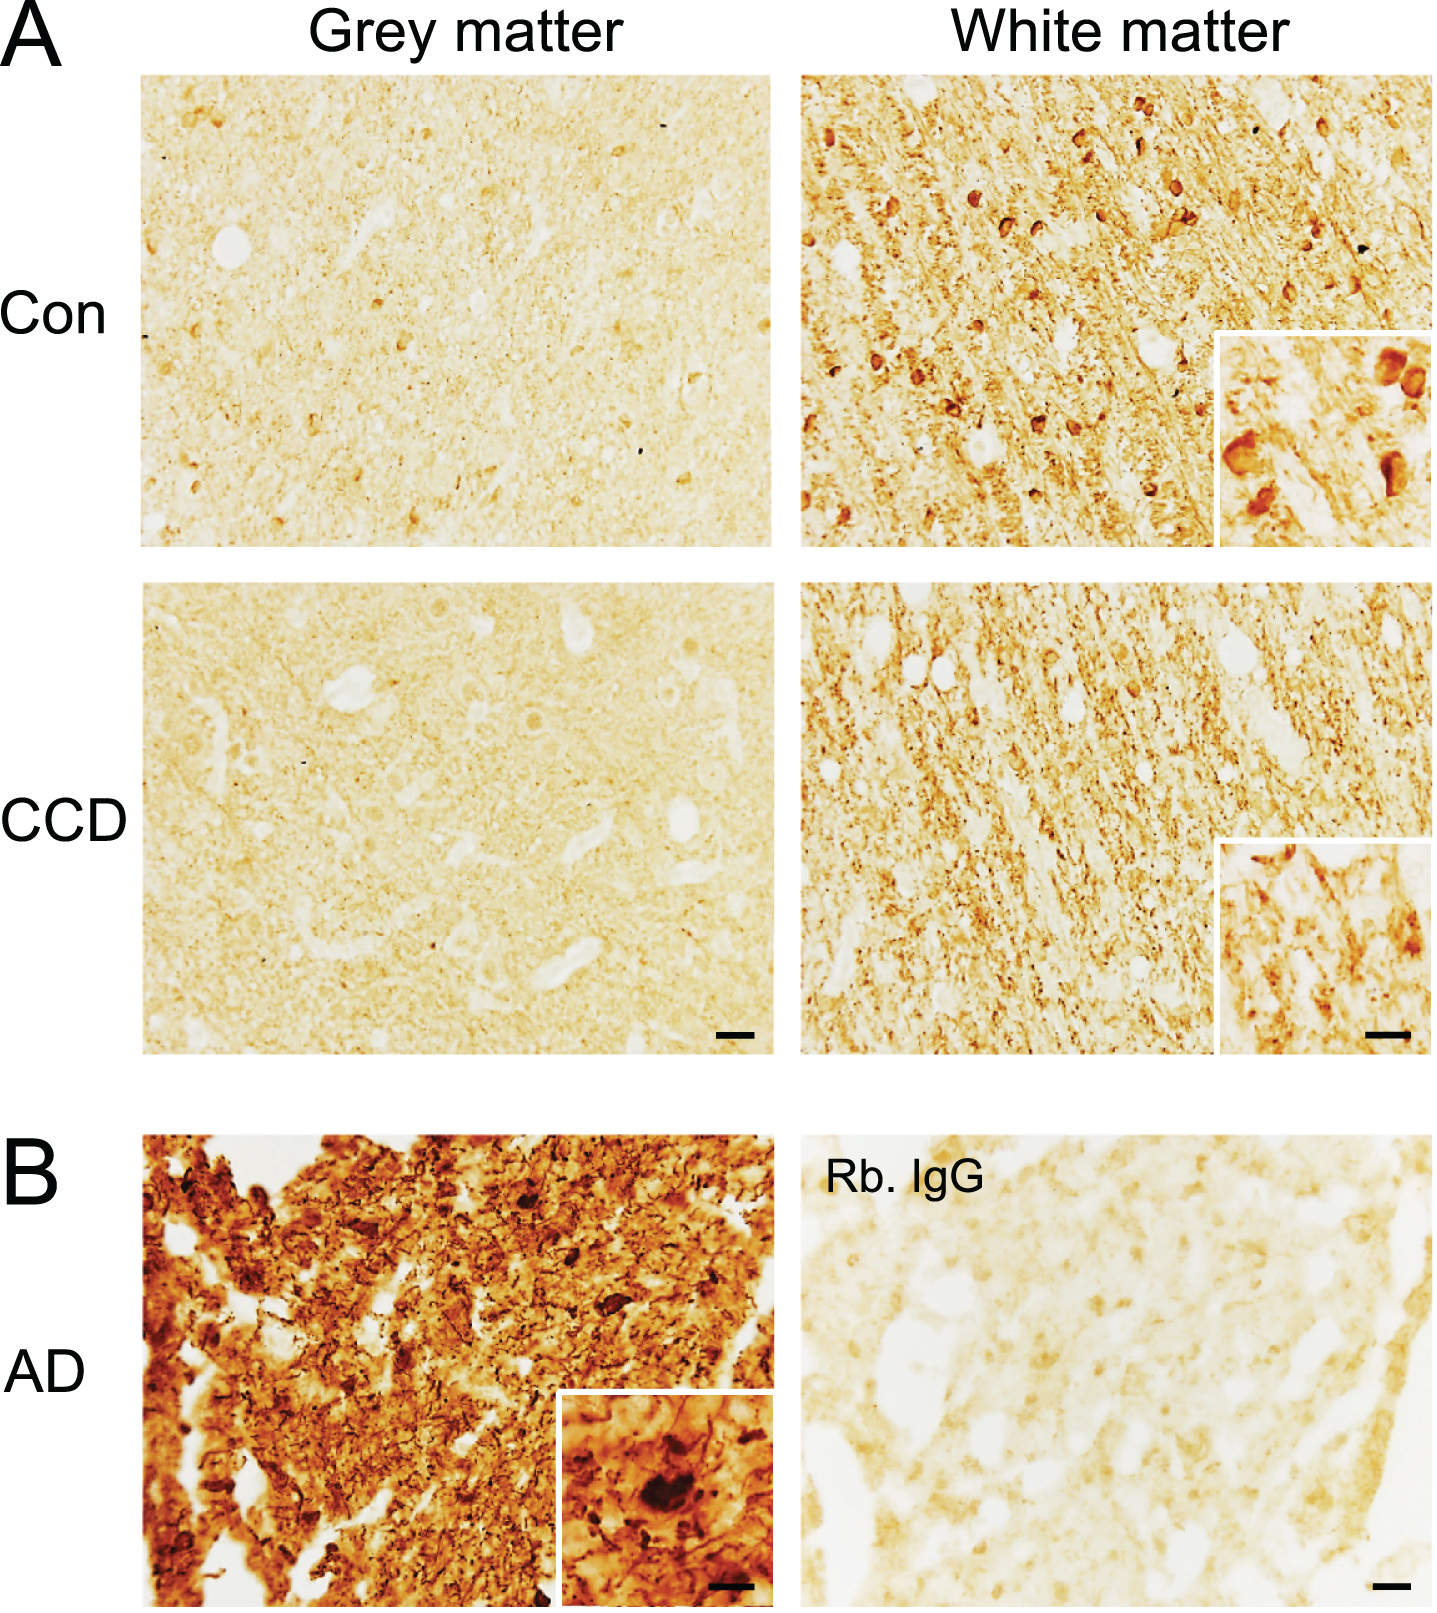 Phosphorylation of the S396 phospho-epitope of tau in white matter in the frontal cortex of CCD and control dogs. Sections of frontal cortex from CCD and control dogs (A) and AD patients (B) stained for S396. A) Phosphorylation of S396 tau was observed as a fiber-staining in the subcortical white matter, while a fainter signal was observed in the grey matter. A dense signal also observed was oligodendrocyte-like cells (inserts) in some dogs. Rabbit IgG controls shown in Supplementary Figure 4 were blank. B) Hyperphosphorylated S396 tau in AD grey matter showing typical neuropil threads and NFTs (insert). Rabbit IgG is almost blank. AD, Alzheimer’s disease; CCD, Canine cognitive dysfunction; Con, control. Scale bars: 20μm (inserts: 10μm).